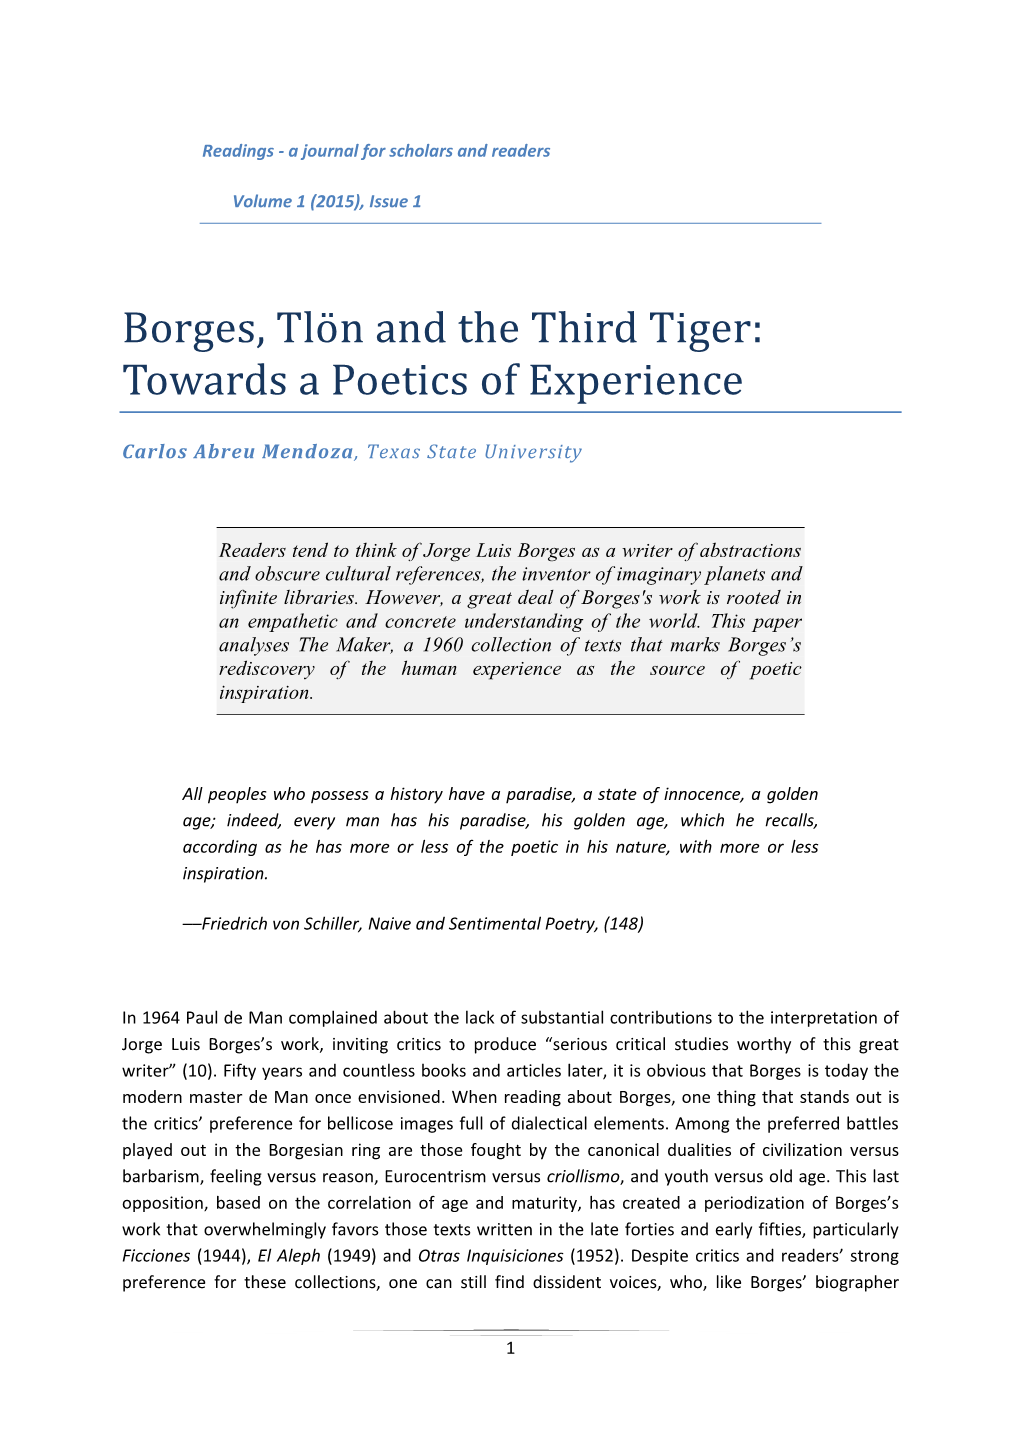 Borges, Tlo N and the Third Tiger: Towards a Poetics of Experience